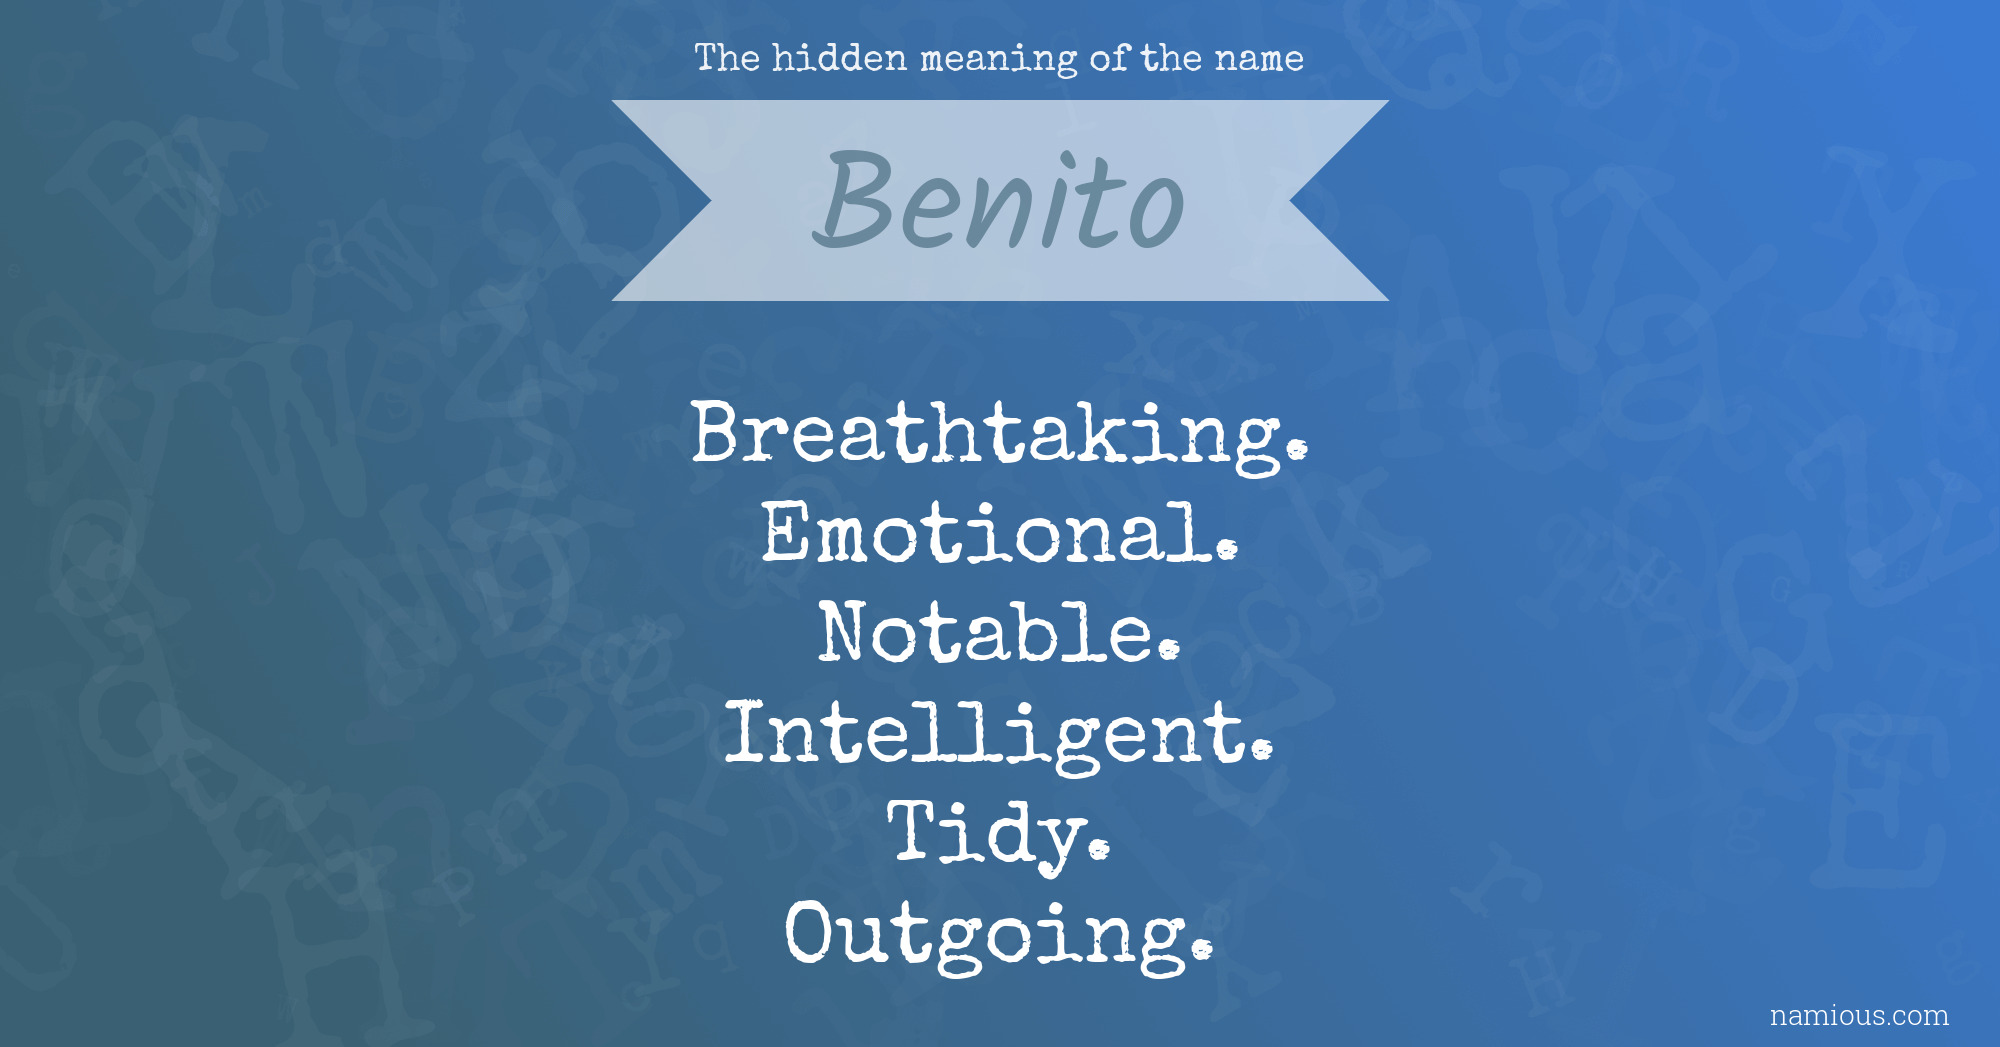 The hidden meaning of the name Benito